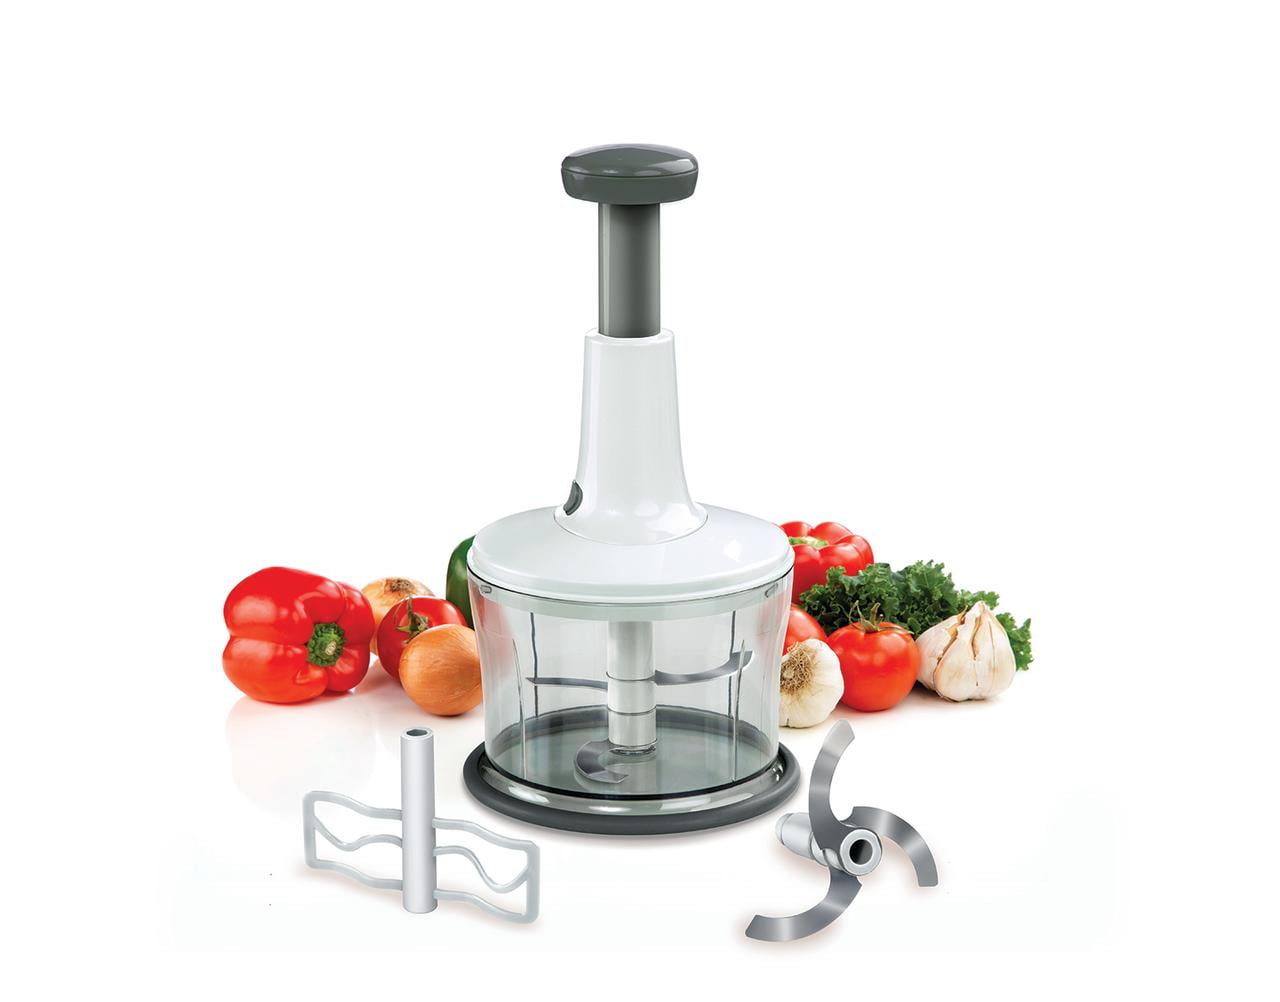 FOOD CHOPPER REVIEW SYVIO FOOD CHOPPER FROM  